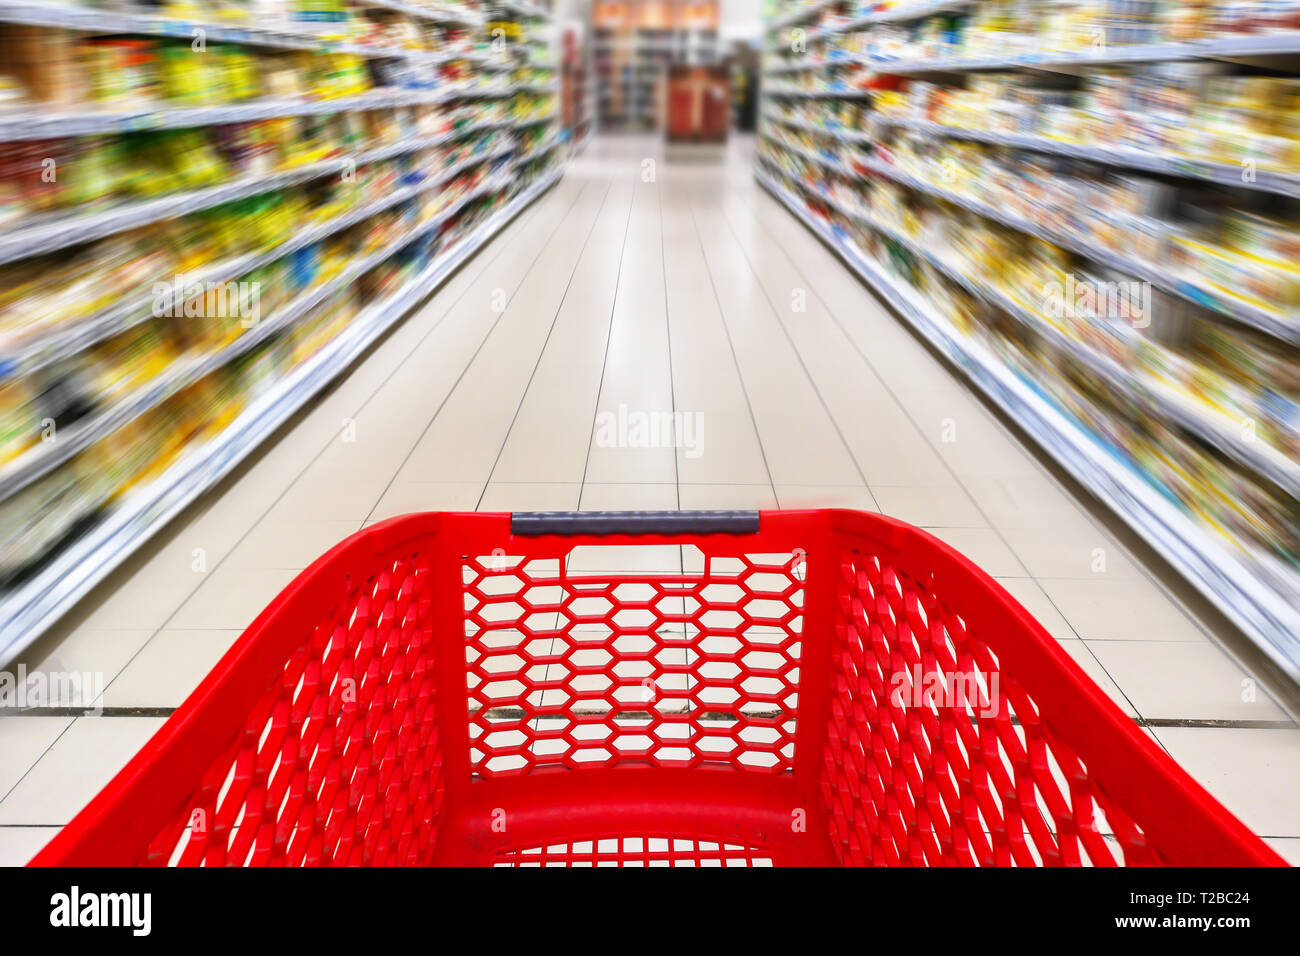 Red empty shopping cart in a supermarket aisle, motion blur Stock Photo